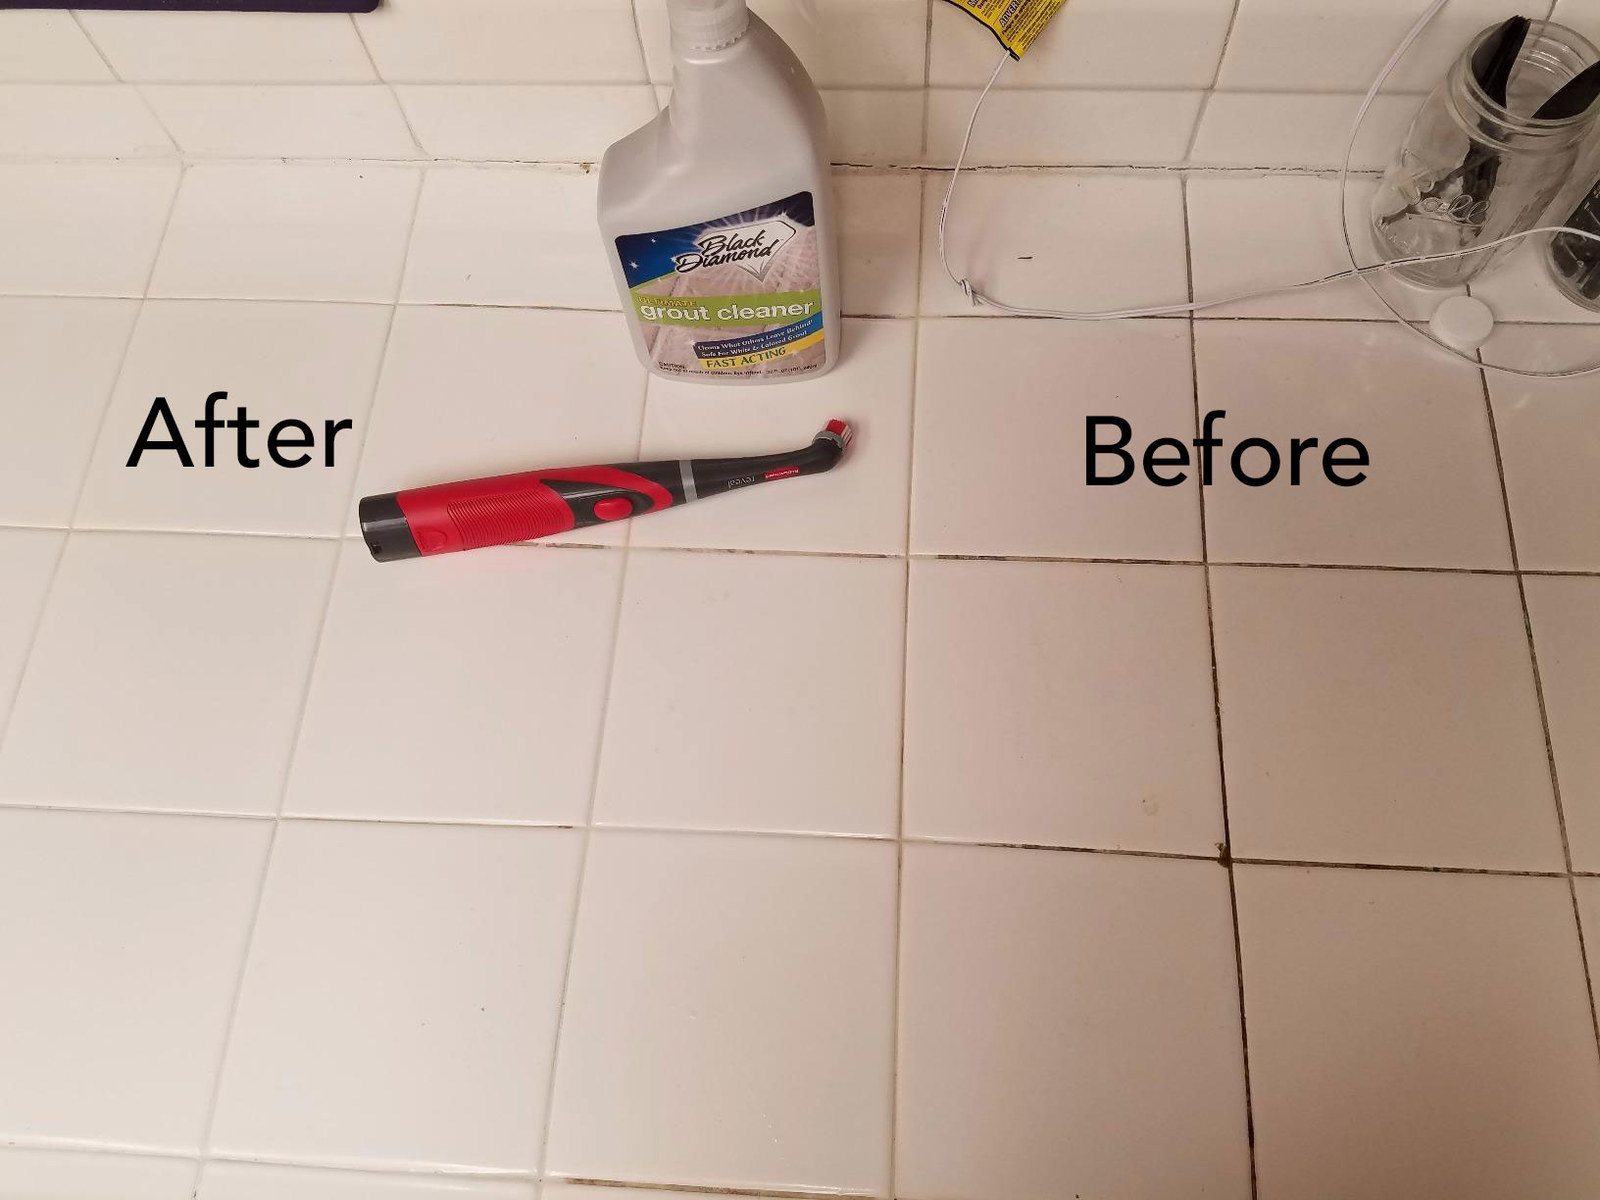 A review image of the scrubber on a half-cleaned surface, with dark, dirty grout before and clean grout after